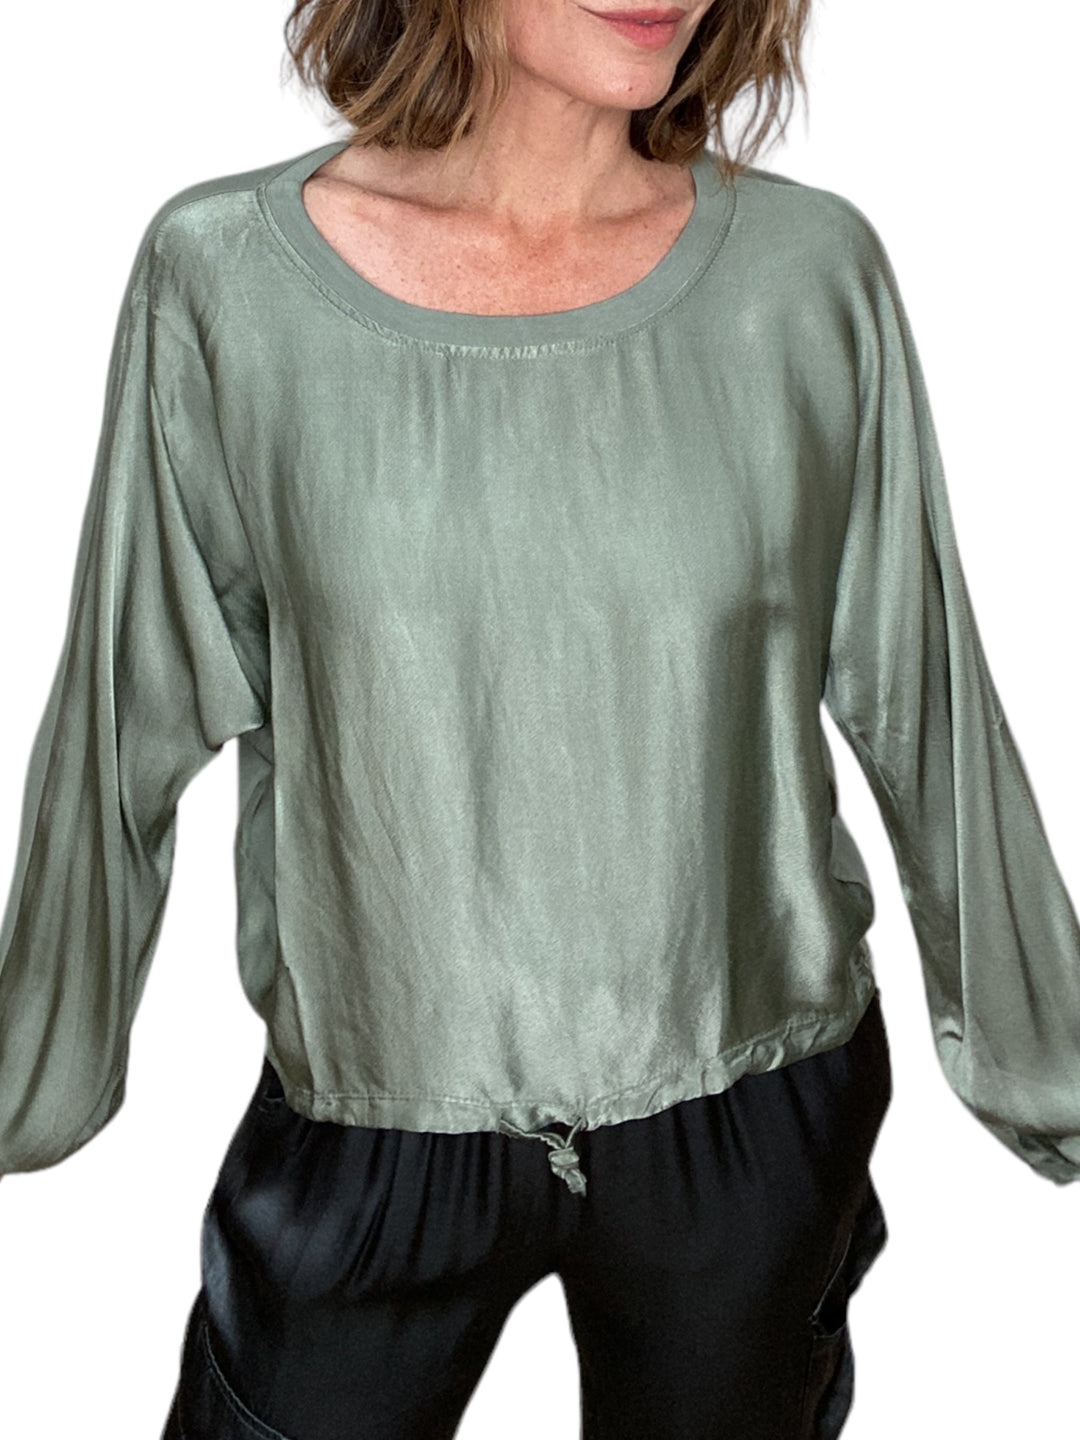 HANSEL SATIN FRONT DRAWSTRING LONG SLEEVE TOP-ARMY - Kingfisher Road - Online Boutique